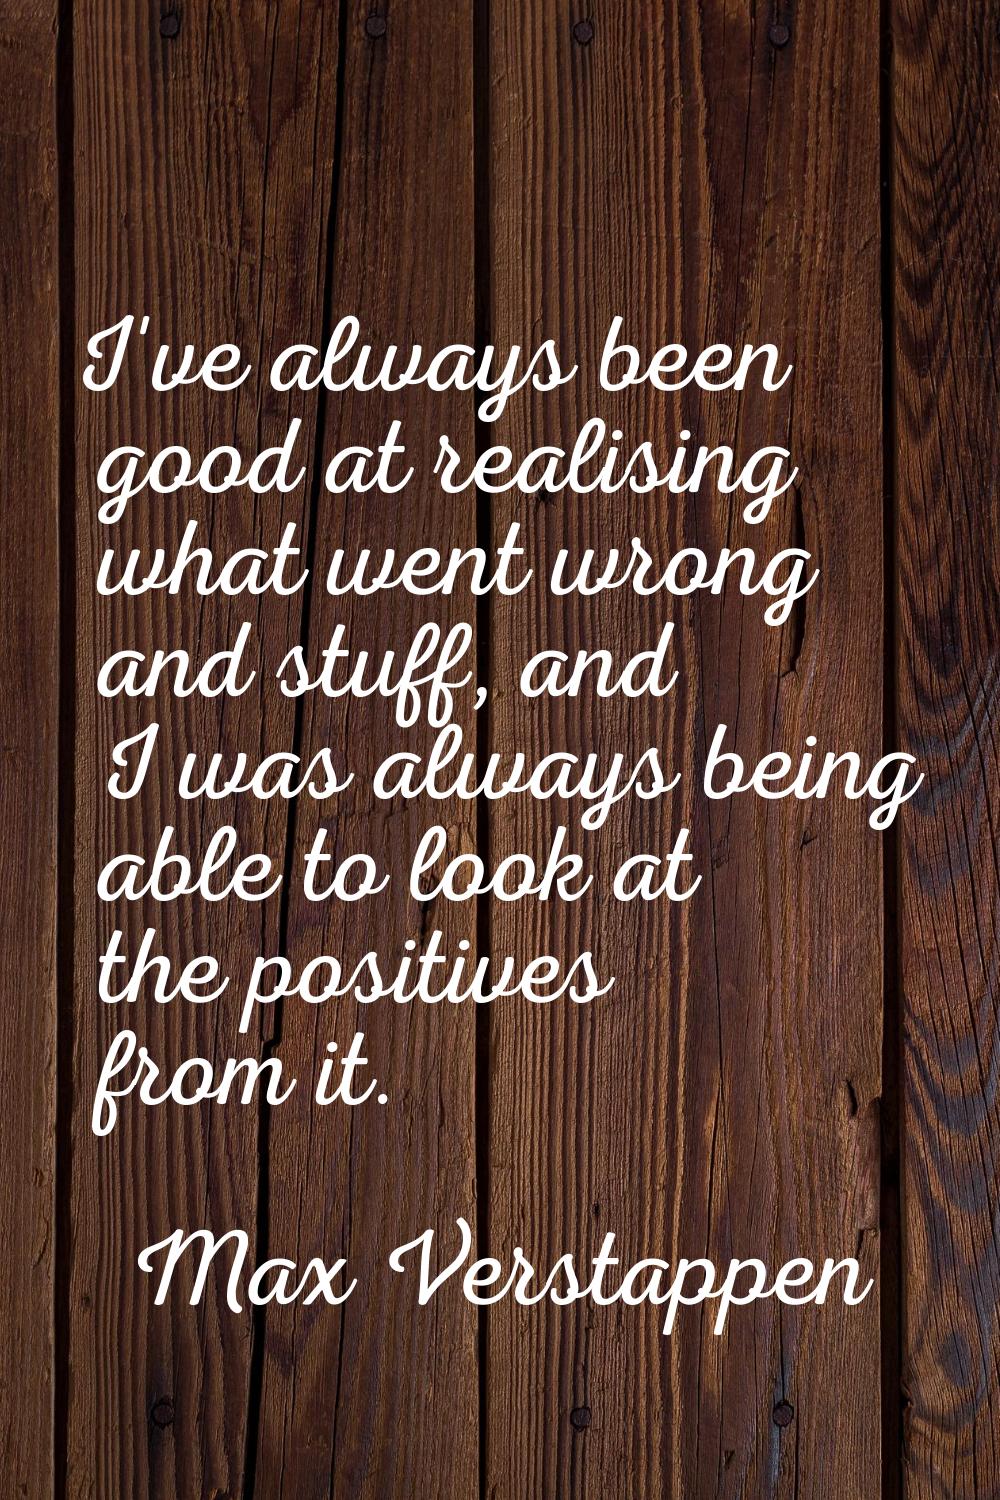 I've always been good at realising what went wrong and stuff, and I was always being able to look a